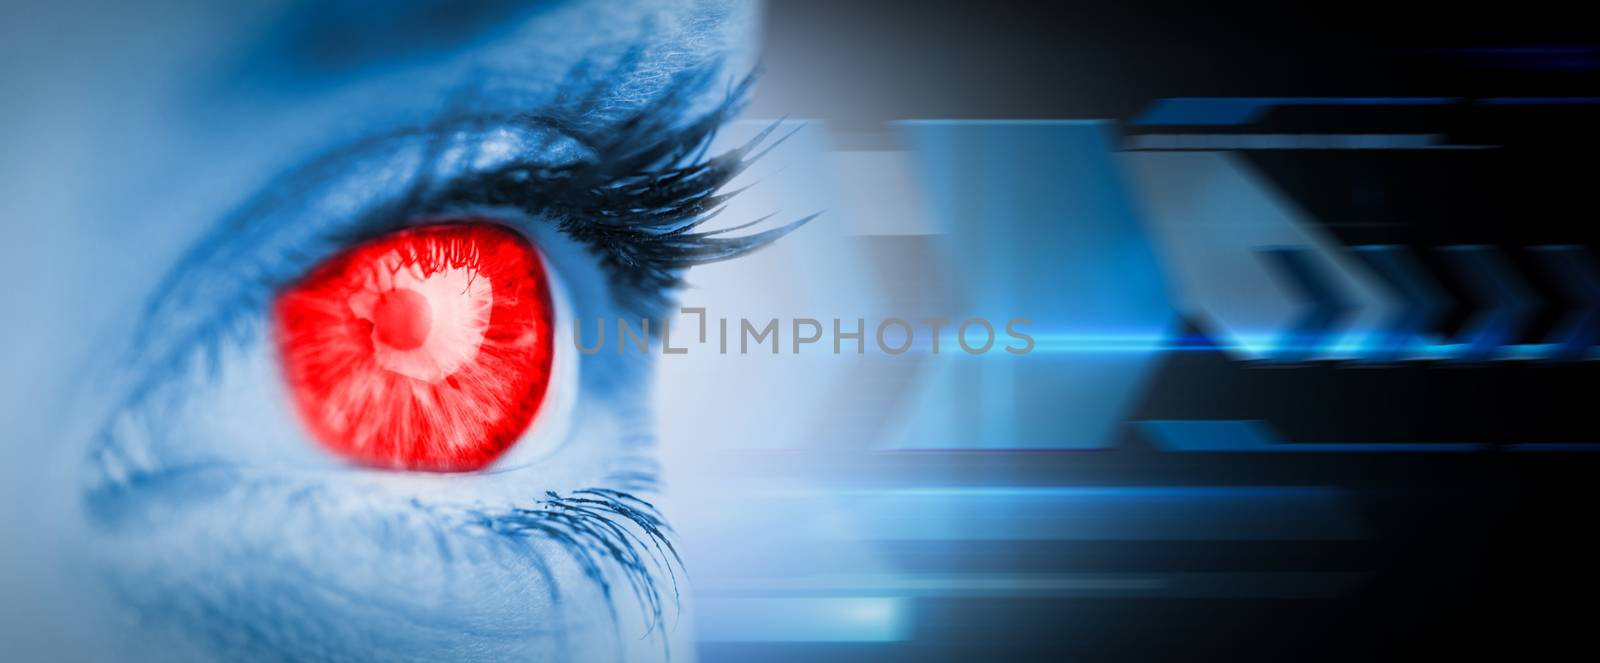 Composite image of red eye on blue face by Wavebreakmedia